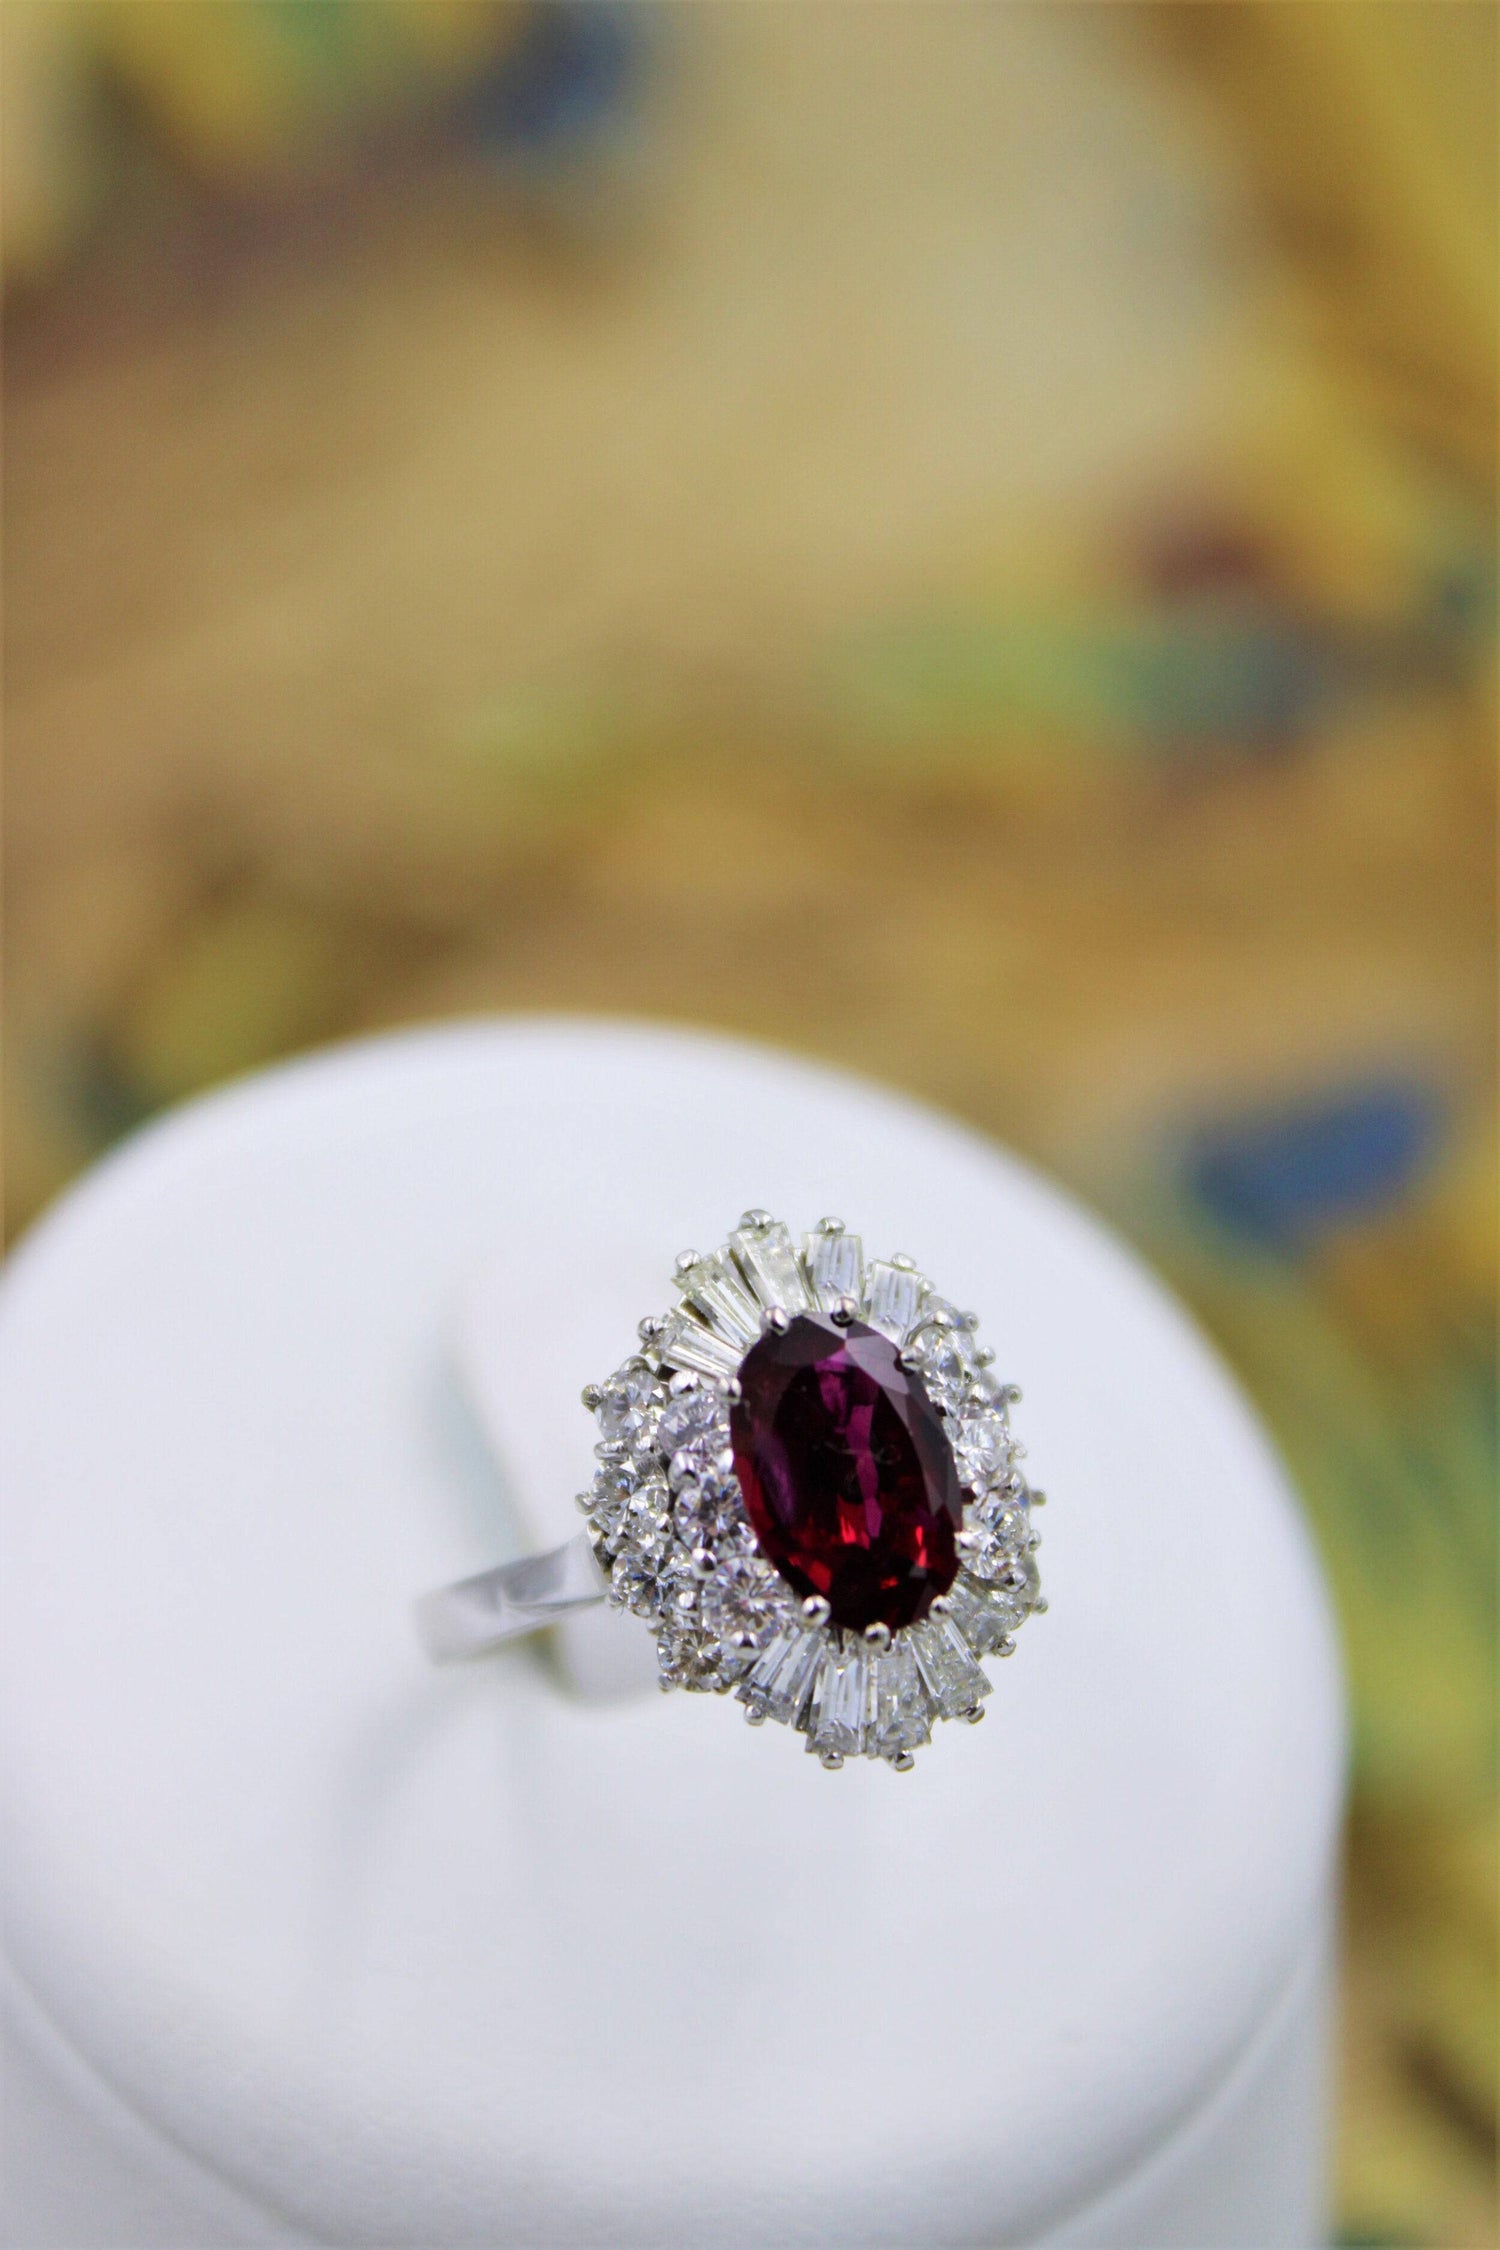 A very fine Natural Untreated Siam Ruby  and Diamond Cluster Ring set in 18ct White Gold, Circa 1970 - Robin Haydock Antiques